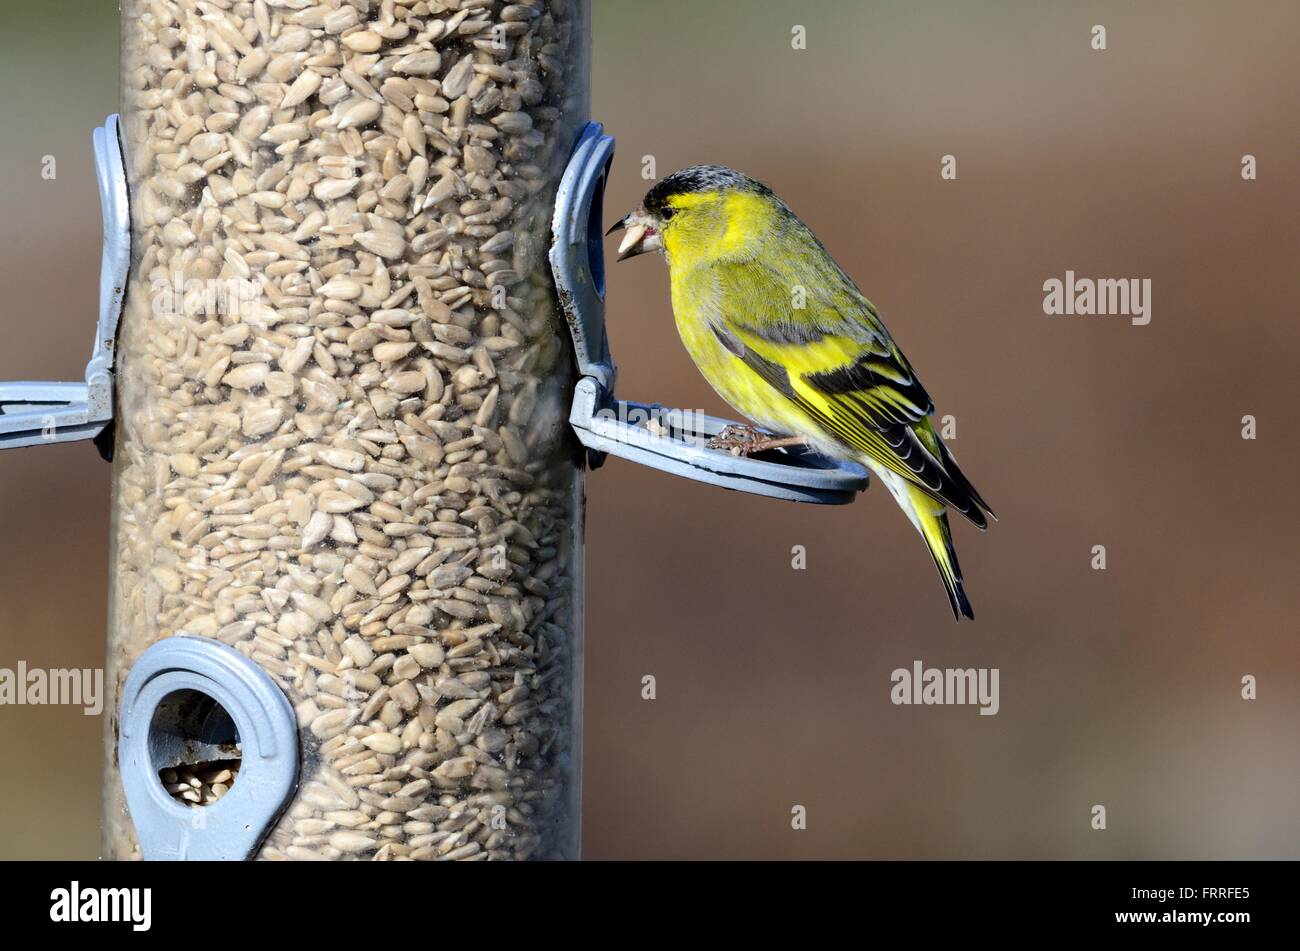 Siskin Carduelis spinus on a bird feeder with a sunflower seed in its beak Stock Photo